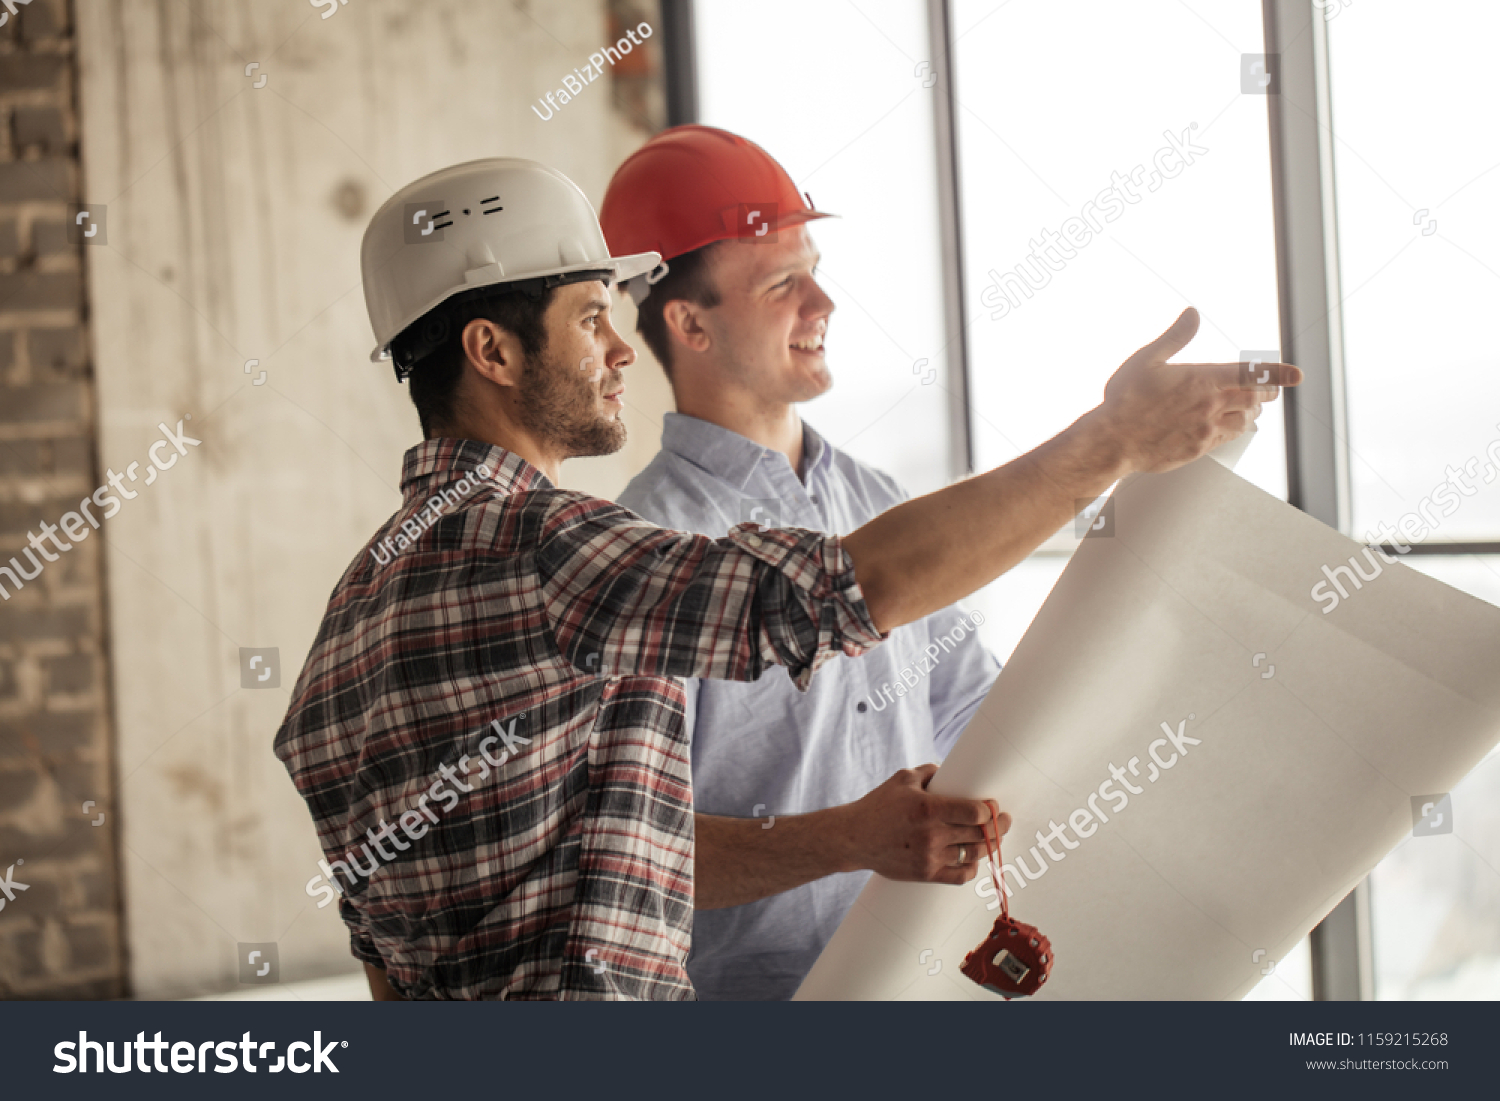 positive worker is showing the the progress of construction to a leader #1159215268